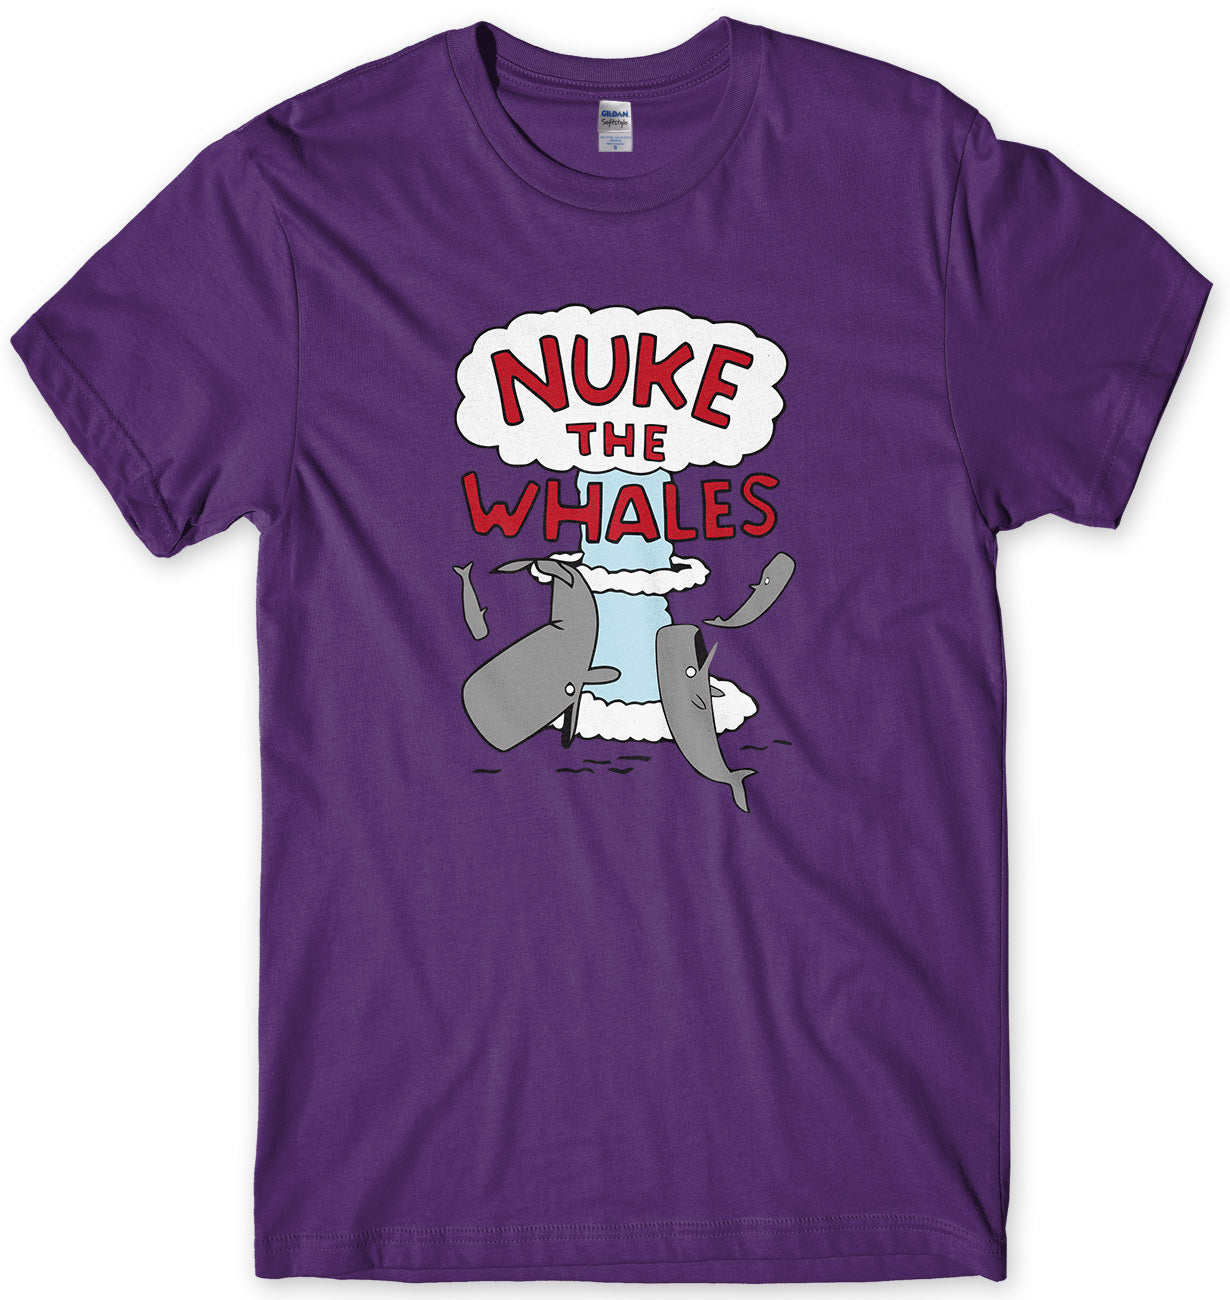 NUKE THE WHALES - INSPIRED BY THE SIMPSONS MENS UNISEX T-SHIRT